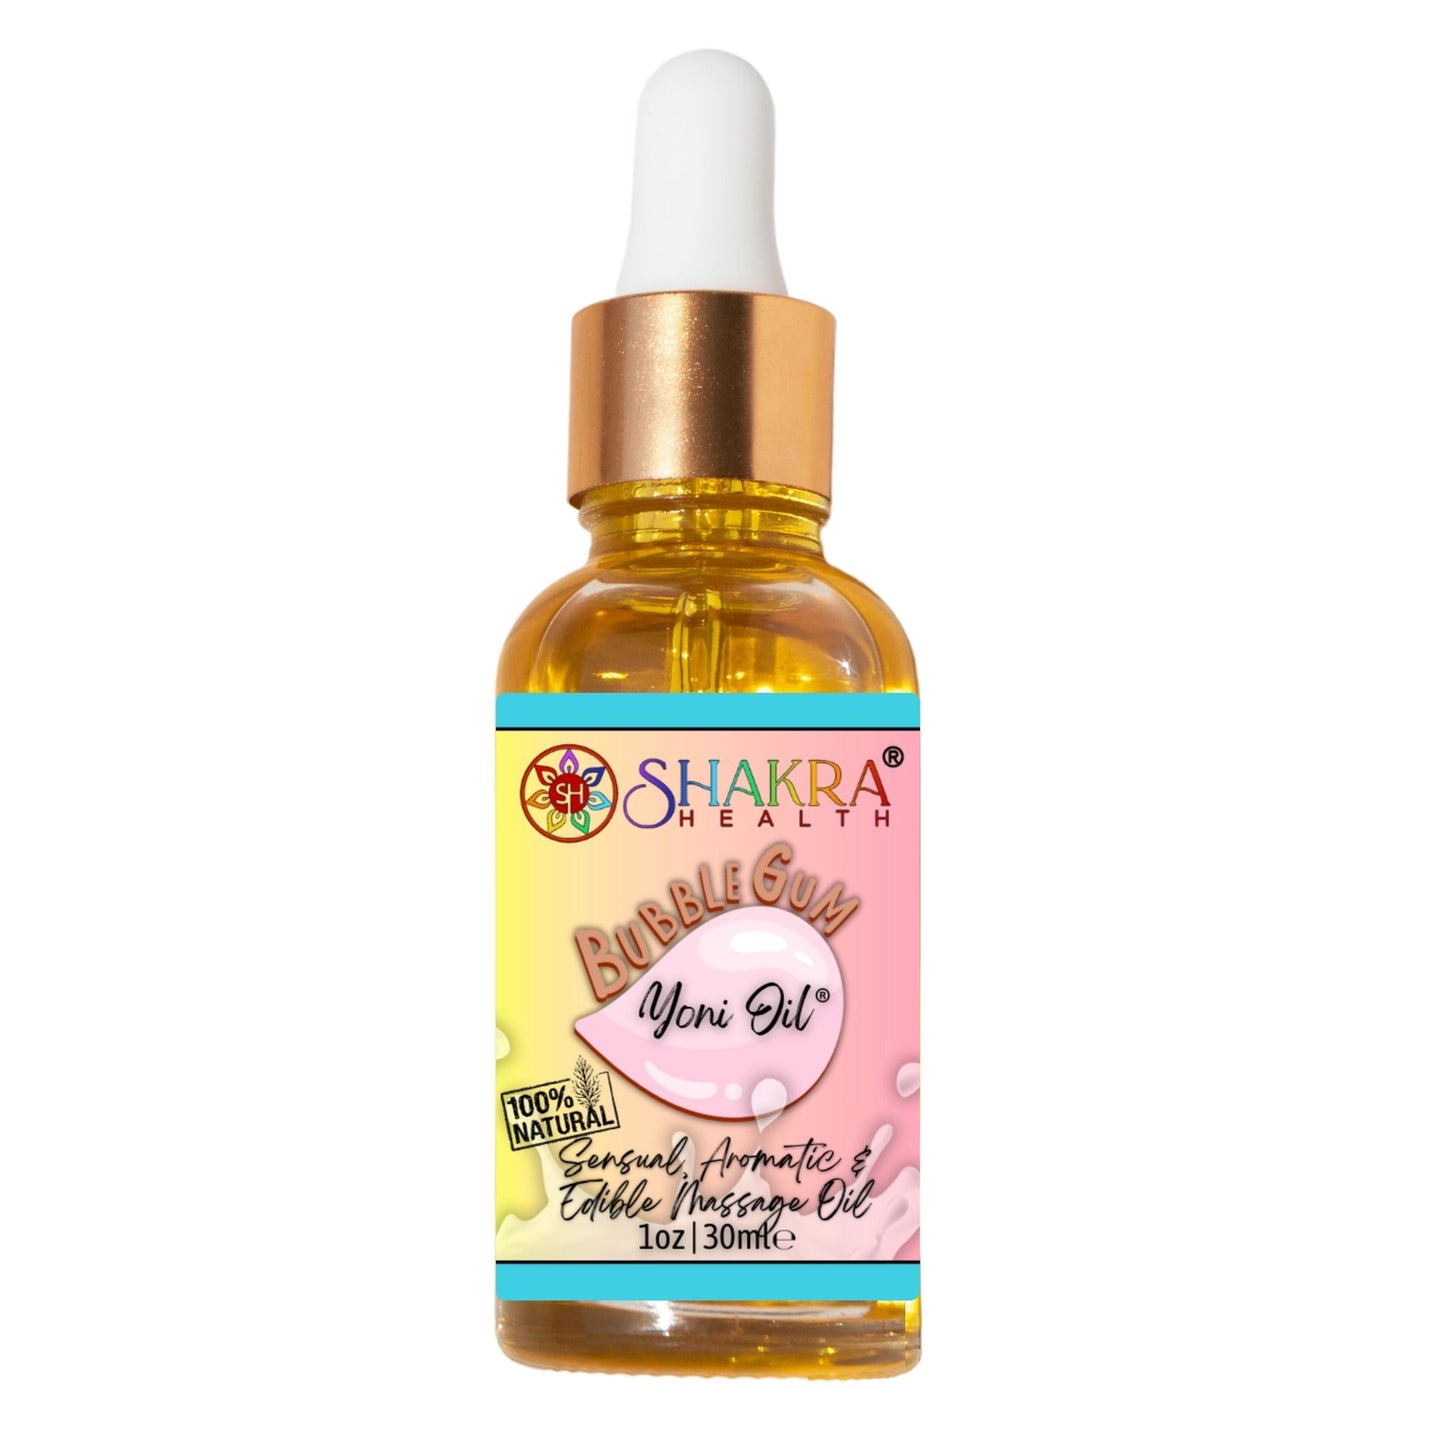 Buy Bubblegum Flavoured Yoni Oil. Natural, Vegan Body Care. - Unleash your confidence with our luxurious LGBTQ+ gender neutral, pH balanced & moisturising, edible Yoni Oil. Celebrate your body with our unique, inclusive, organic product. Discover the secret to ultimate comfort, massage, relaxation & pleasure in this versatile oil. Experience pure bliss. at Sacred Remedy Online